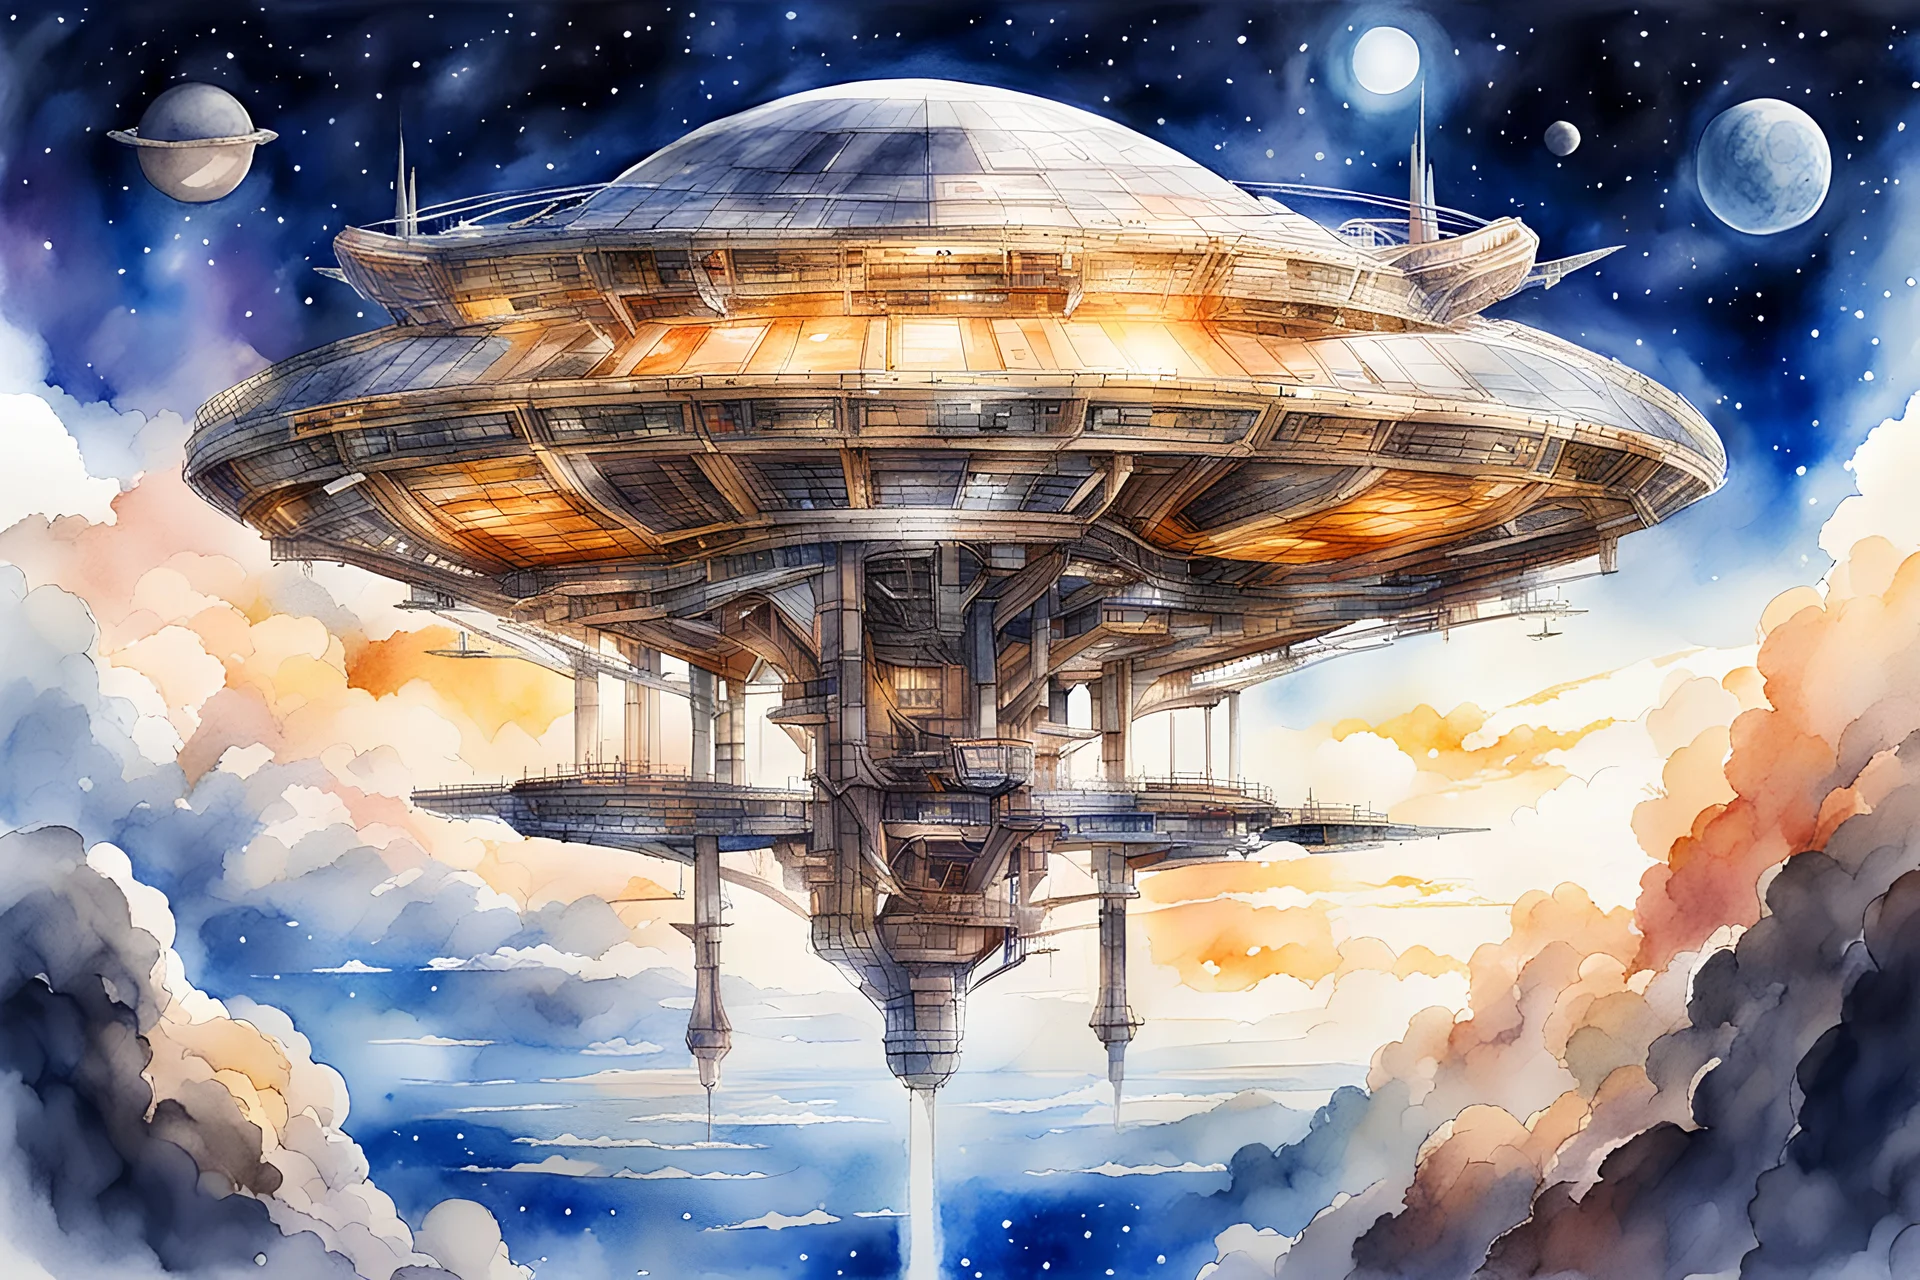 masterpiece, anime illustration, watercolor painting, mega structure, space-based solar power